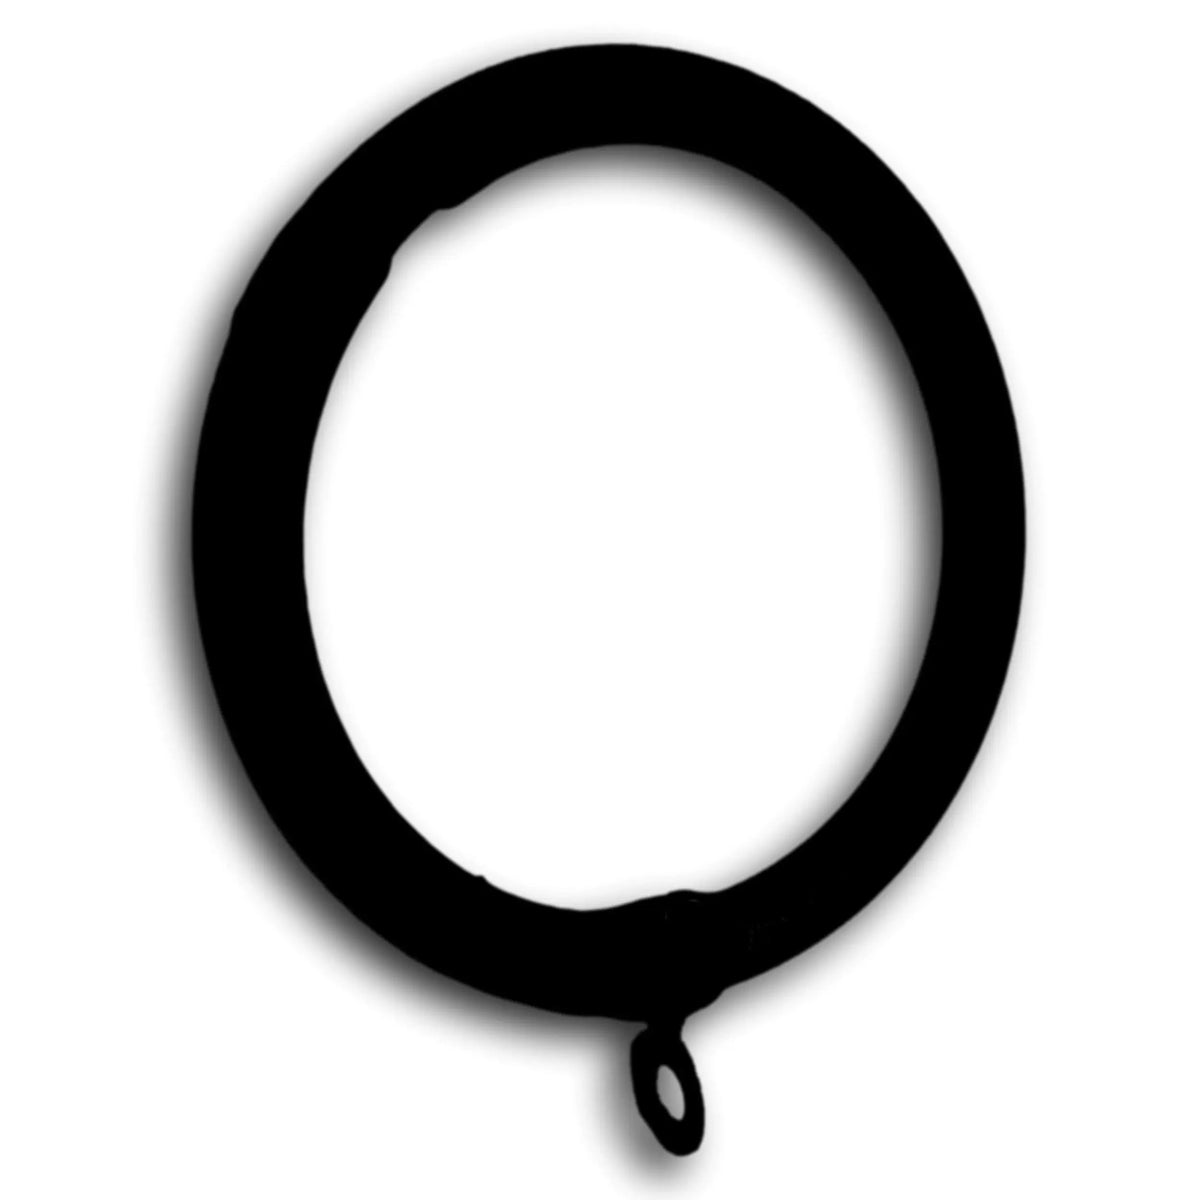 Curtain Ring for 1-1/2" Tubing Components for 1-1/2" Od Tubing, Drapery Hardware MatteBlackPowderCoatedFinish Trade Diversified